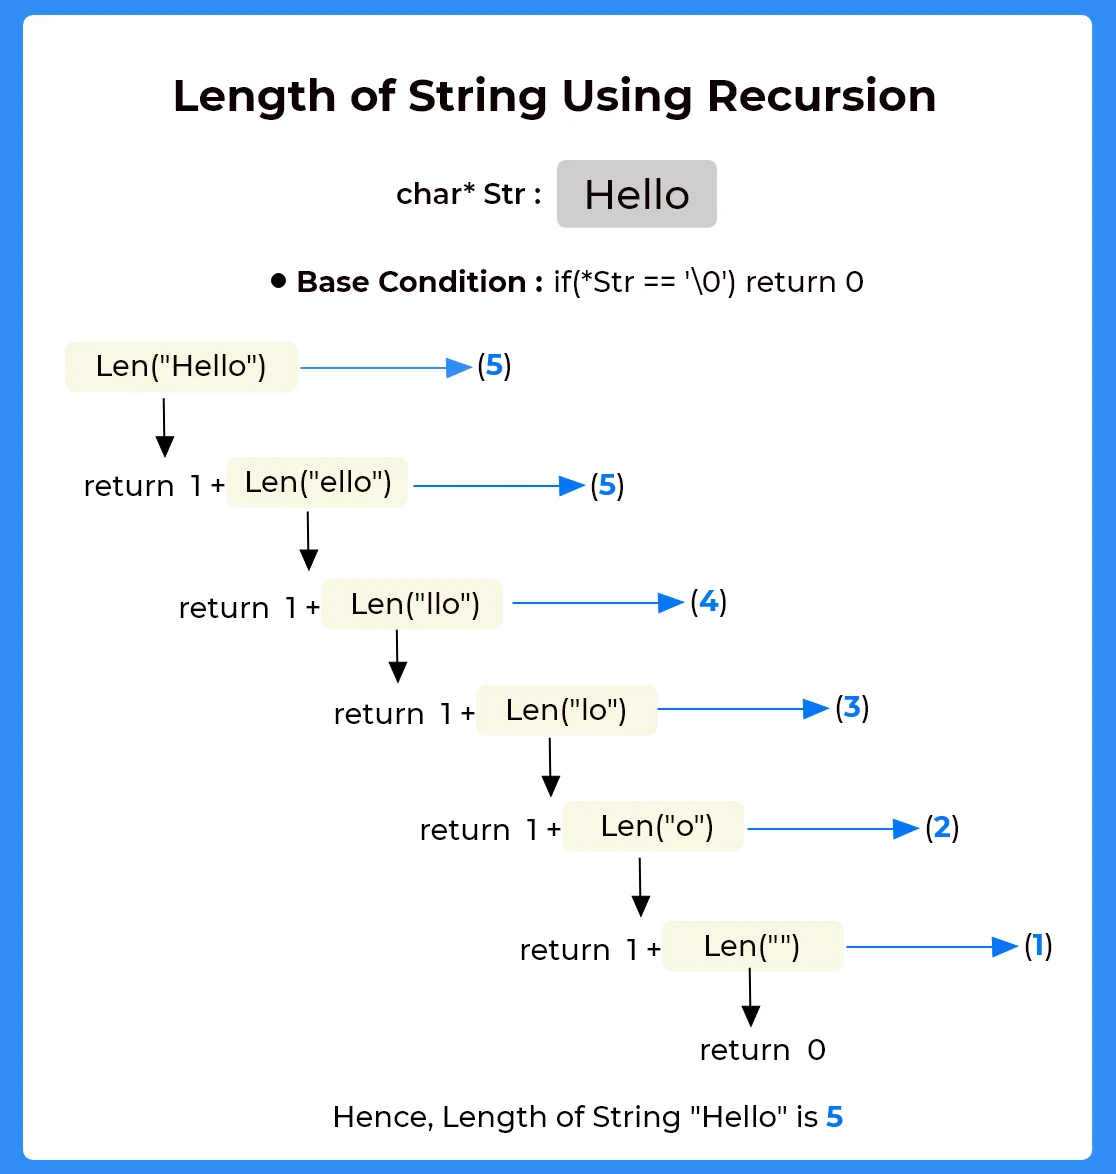 Length of the string